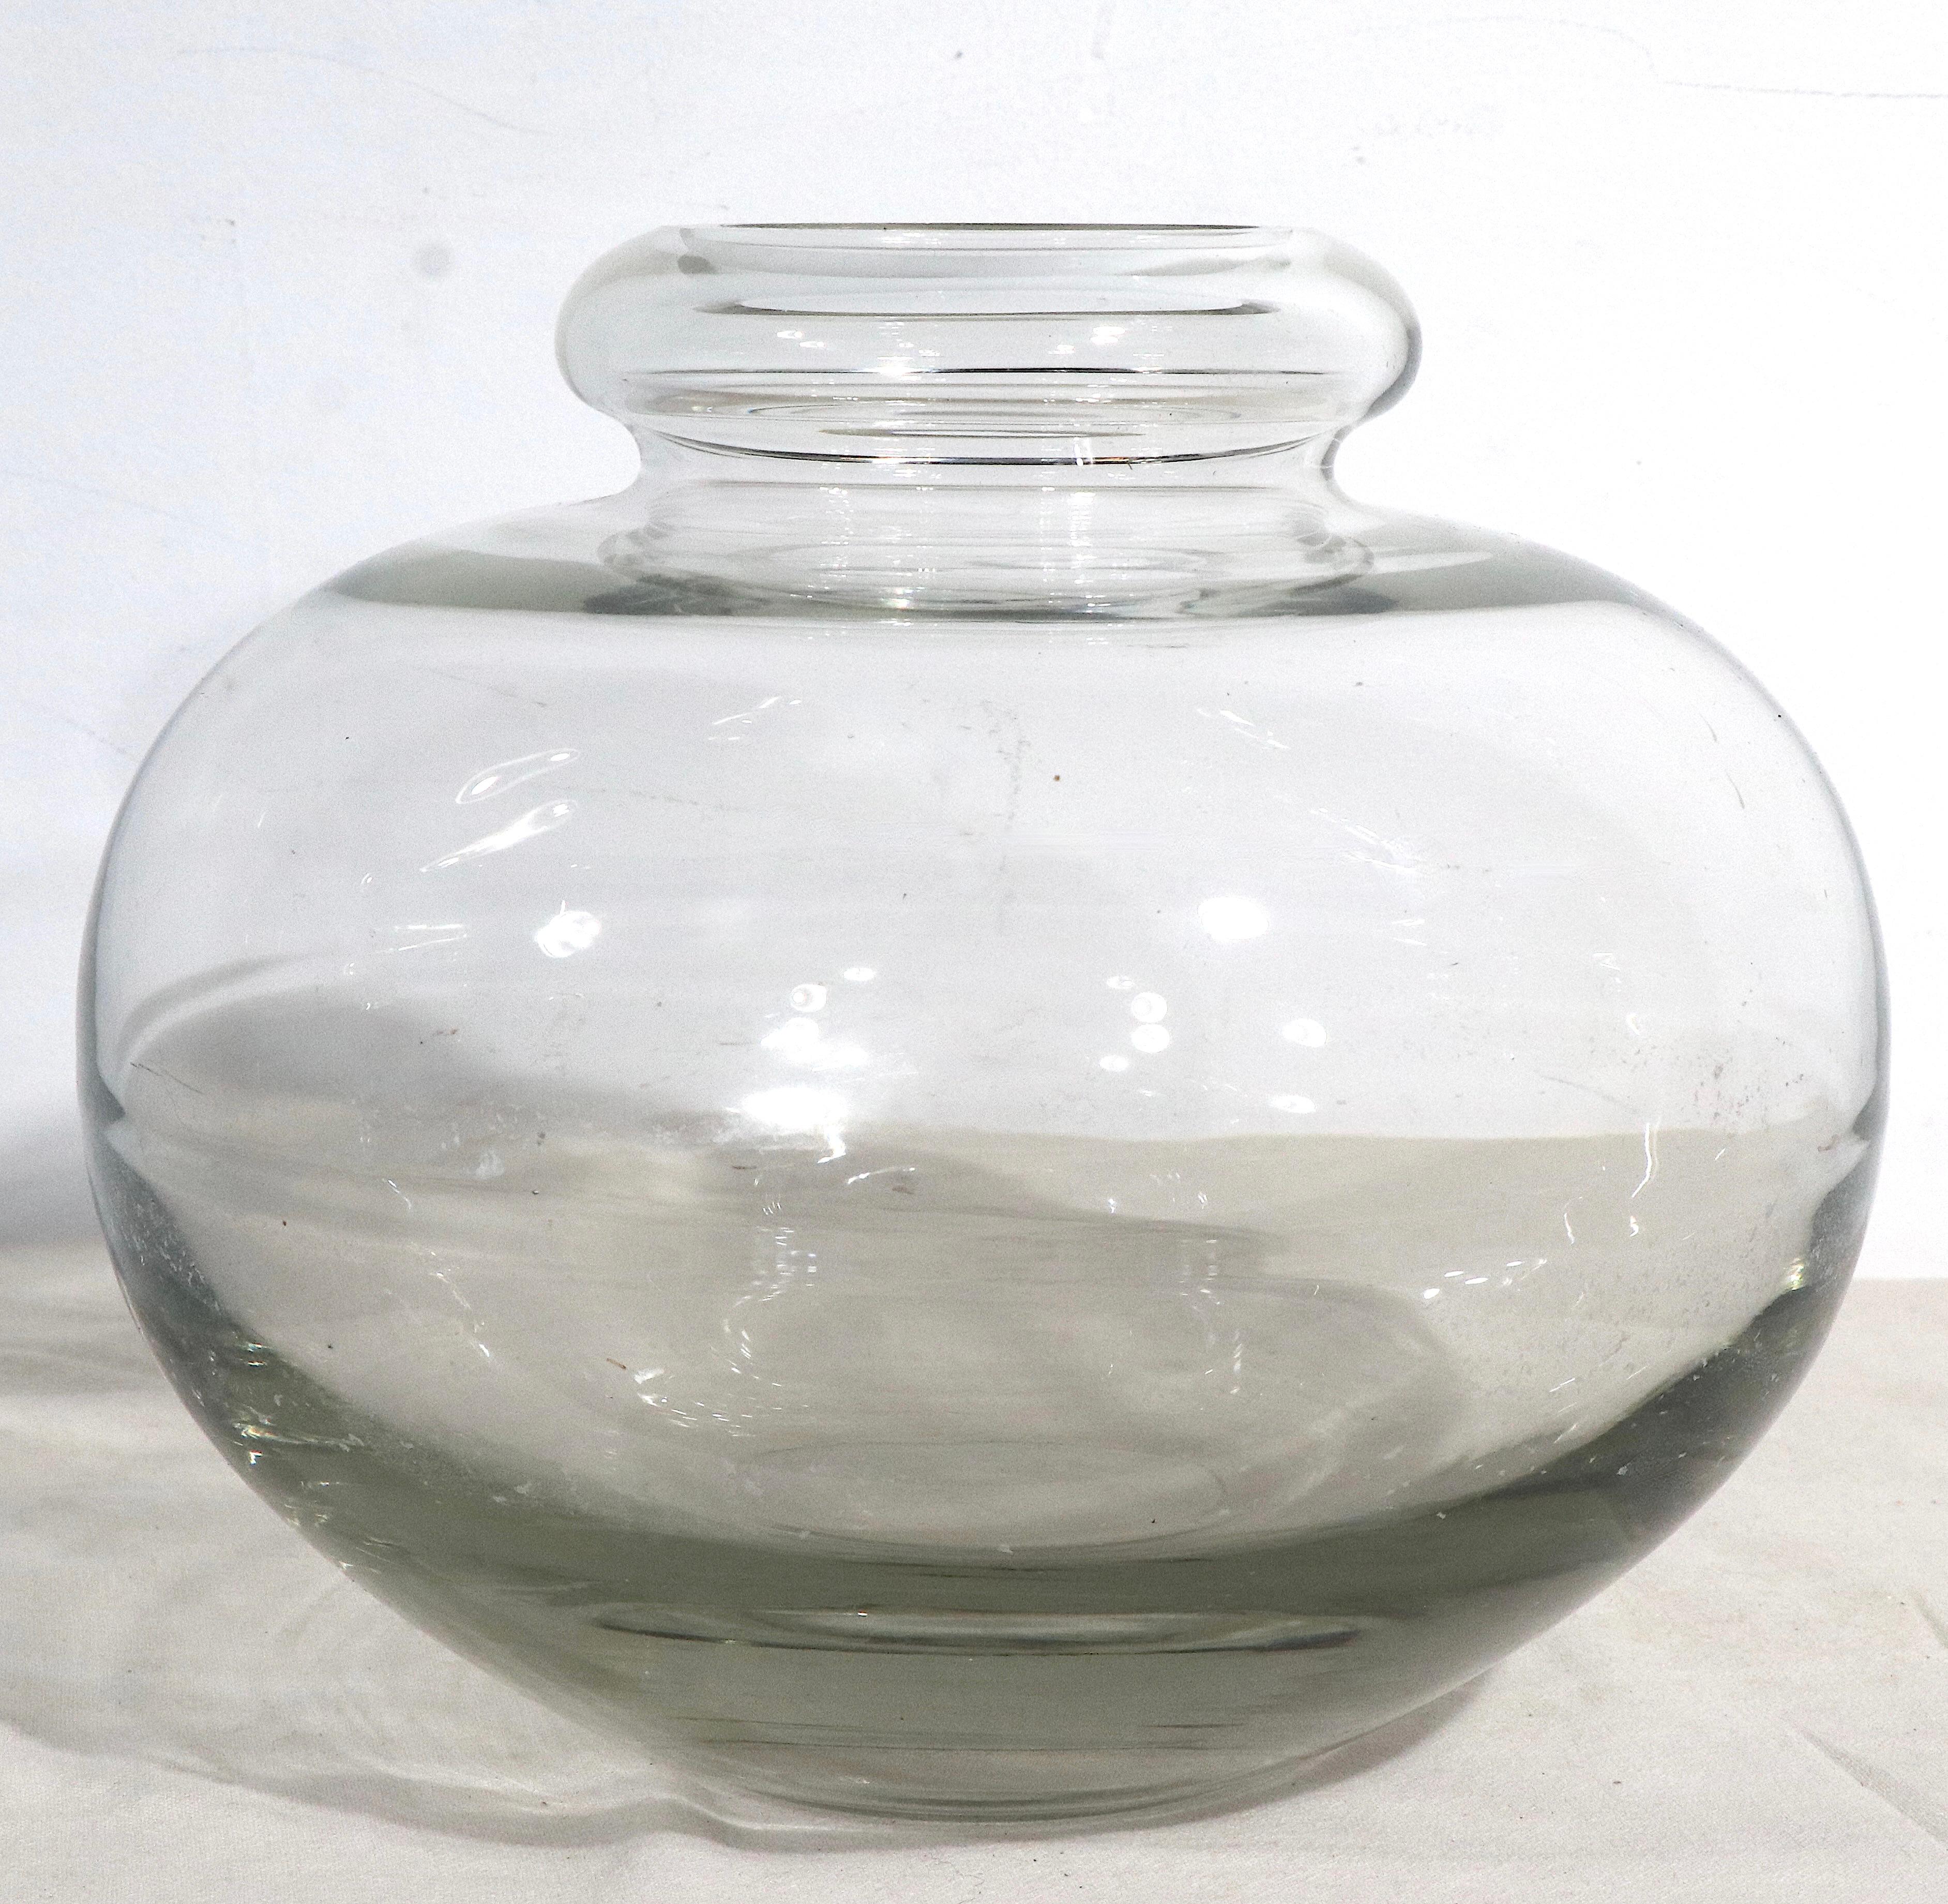 Well crafted mid-century vase in clear glass, having a finish top edge and polished bottom. This piece is in very fine, original condition, free of damage or repairs. Attributed to A.D. Copier, for Leerdam Glasfabrik, this example is unsigned.